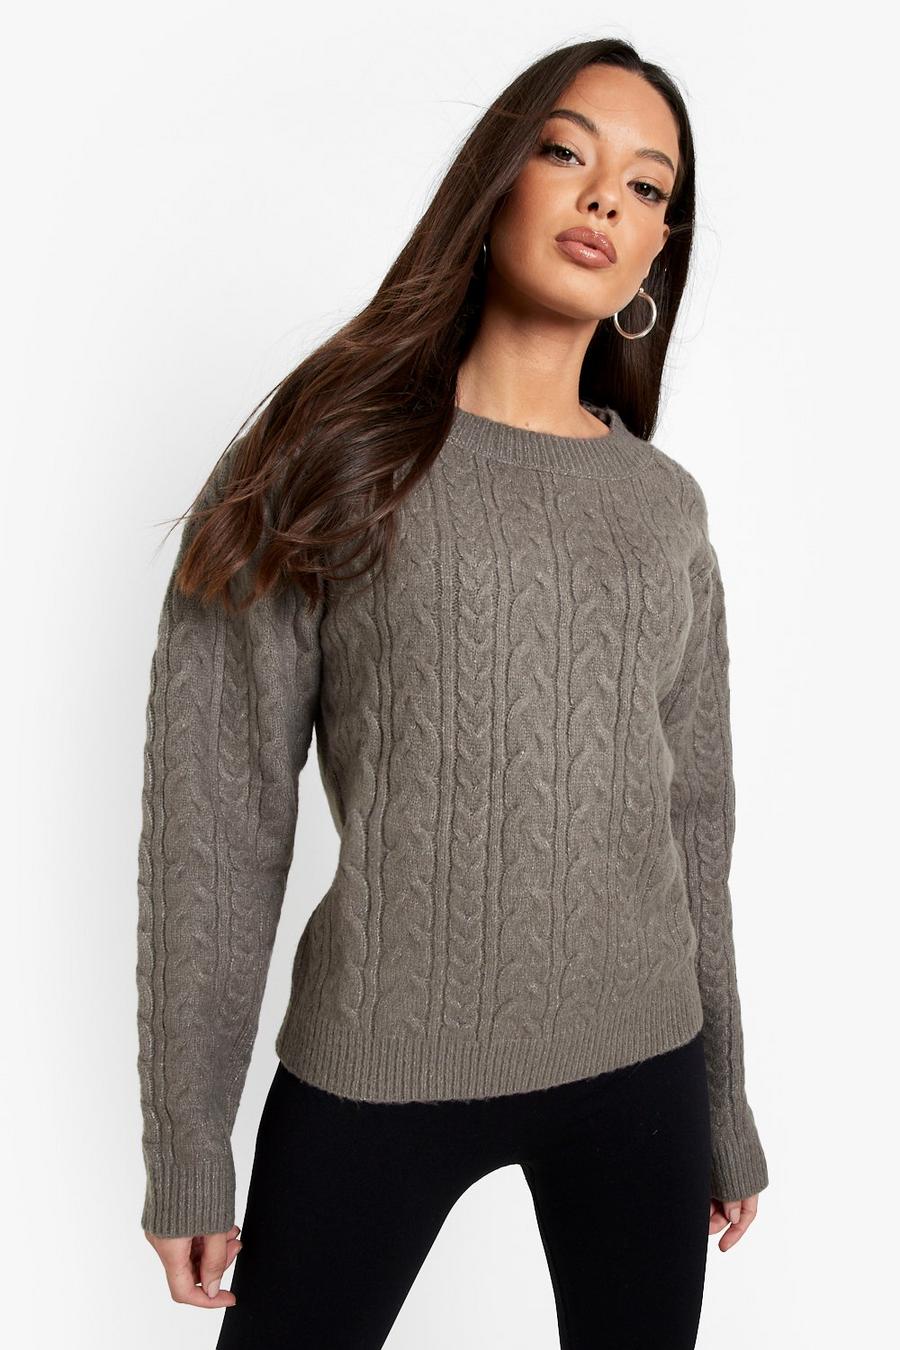 Charcoal grey Cable Knit Sweater